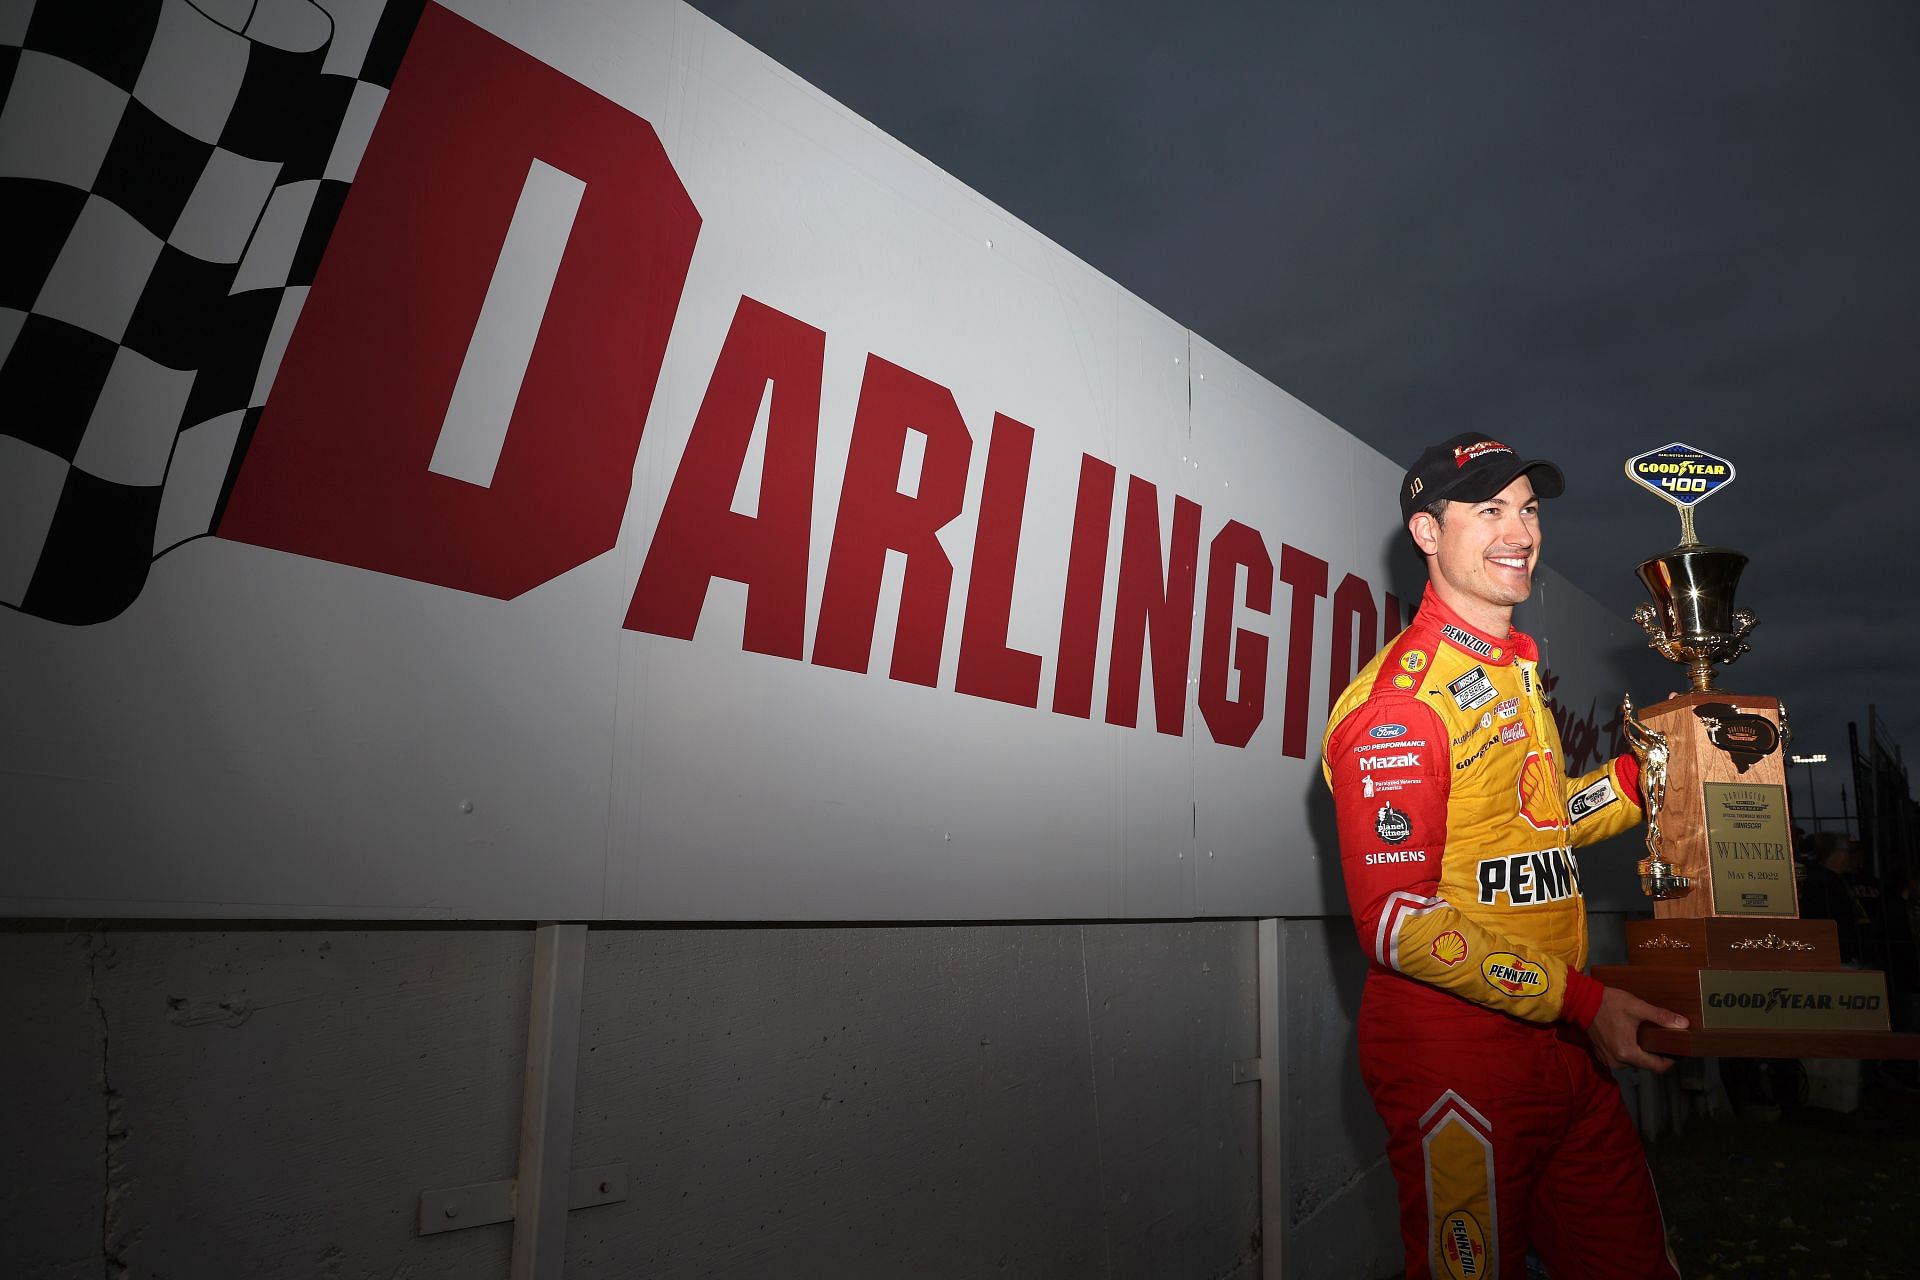 Joey Logano poses with the Goodyear 400 trophy after winning the NASCAR Cup Series Goodyear 400 at Darlington Raceway (Photo by James Gilbert/Getty Images)